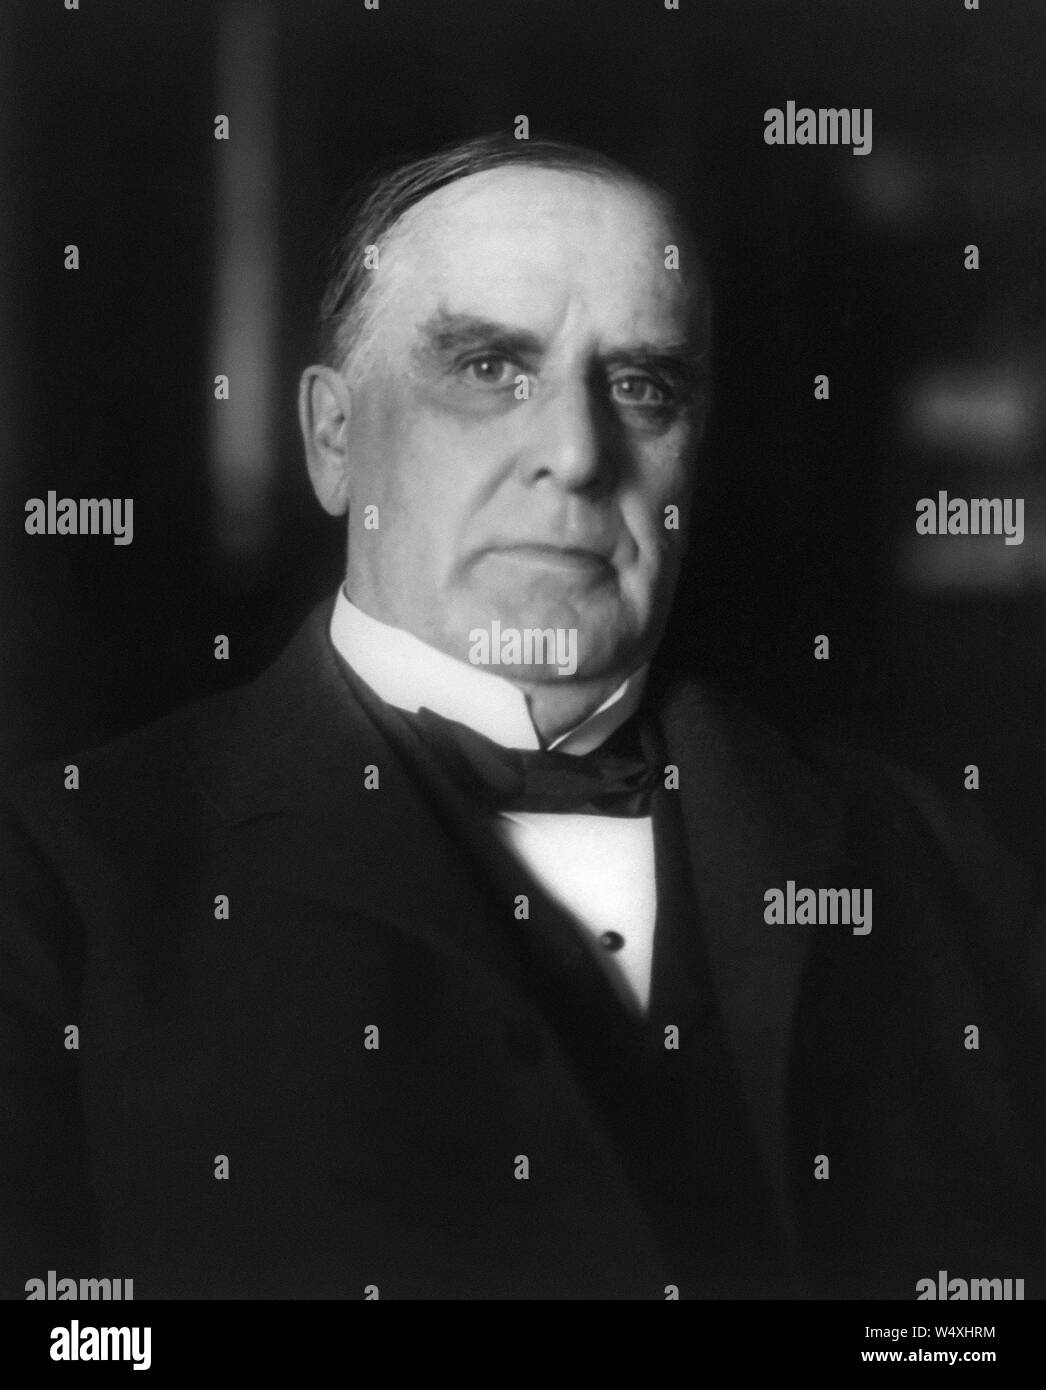 William McKinley (1843-1901), 25th President of the United States 1897-1901, Head and Shoulders Portrait, Photograph by B.M. Clinedinst, 1901 Stock Photo